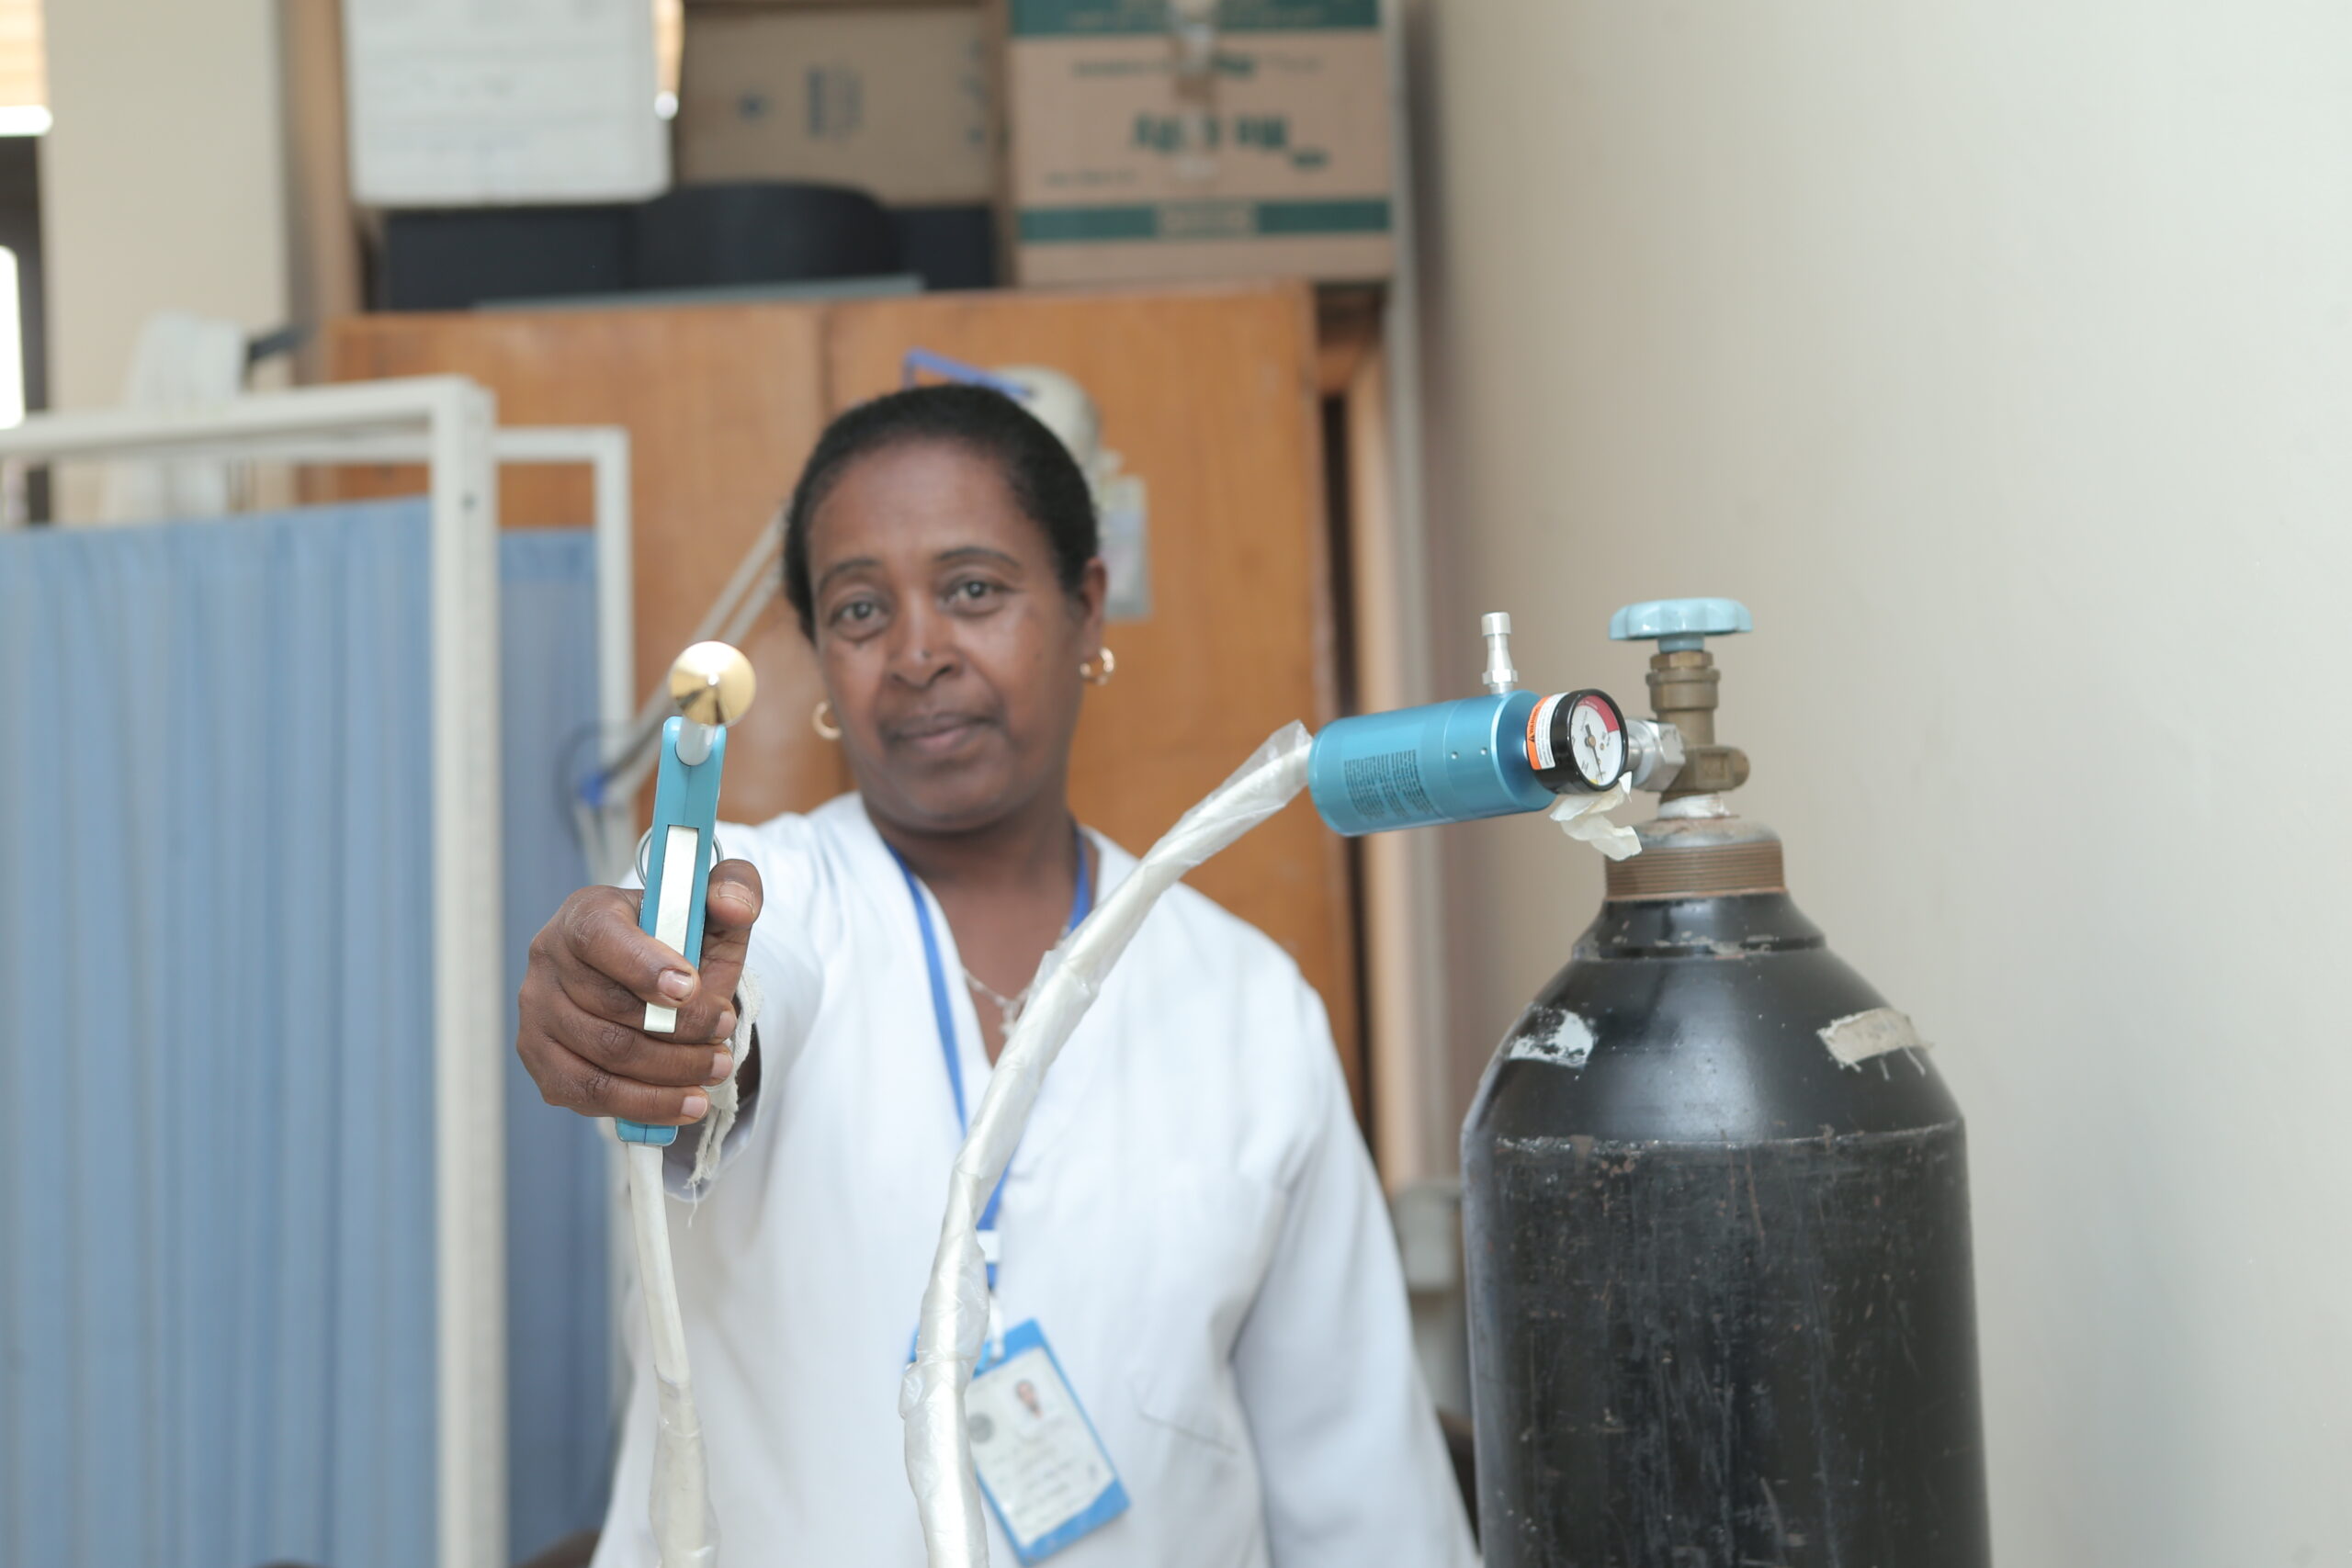 A health worker holds a technology used for cryotherapy